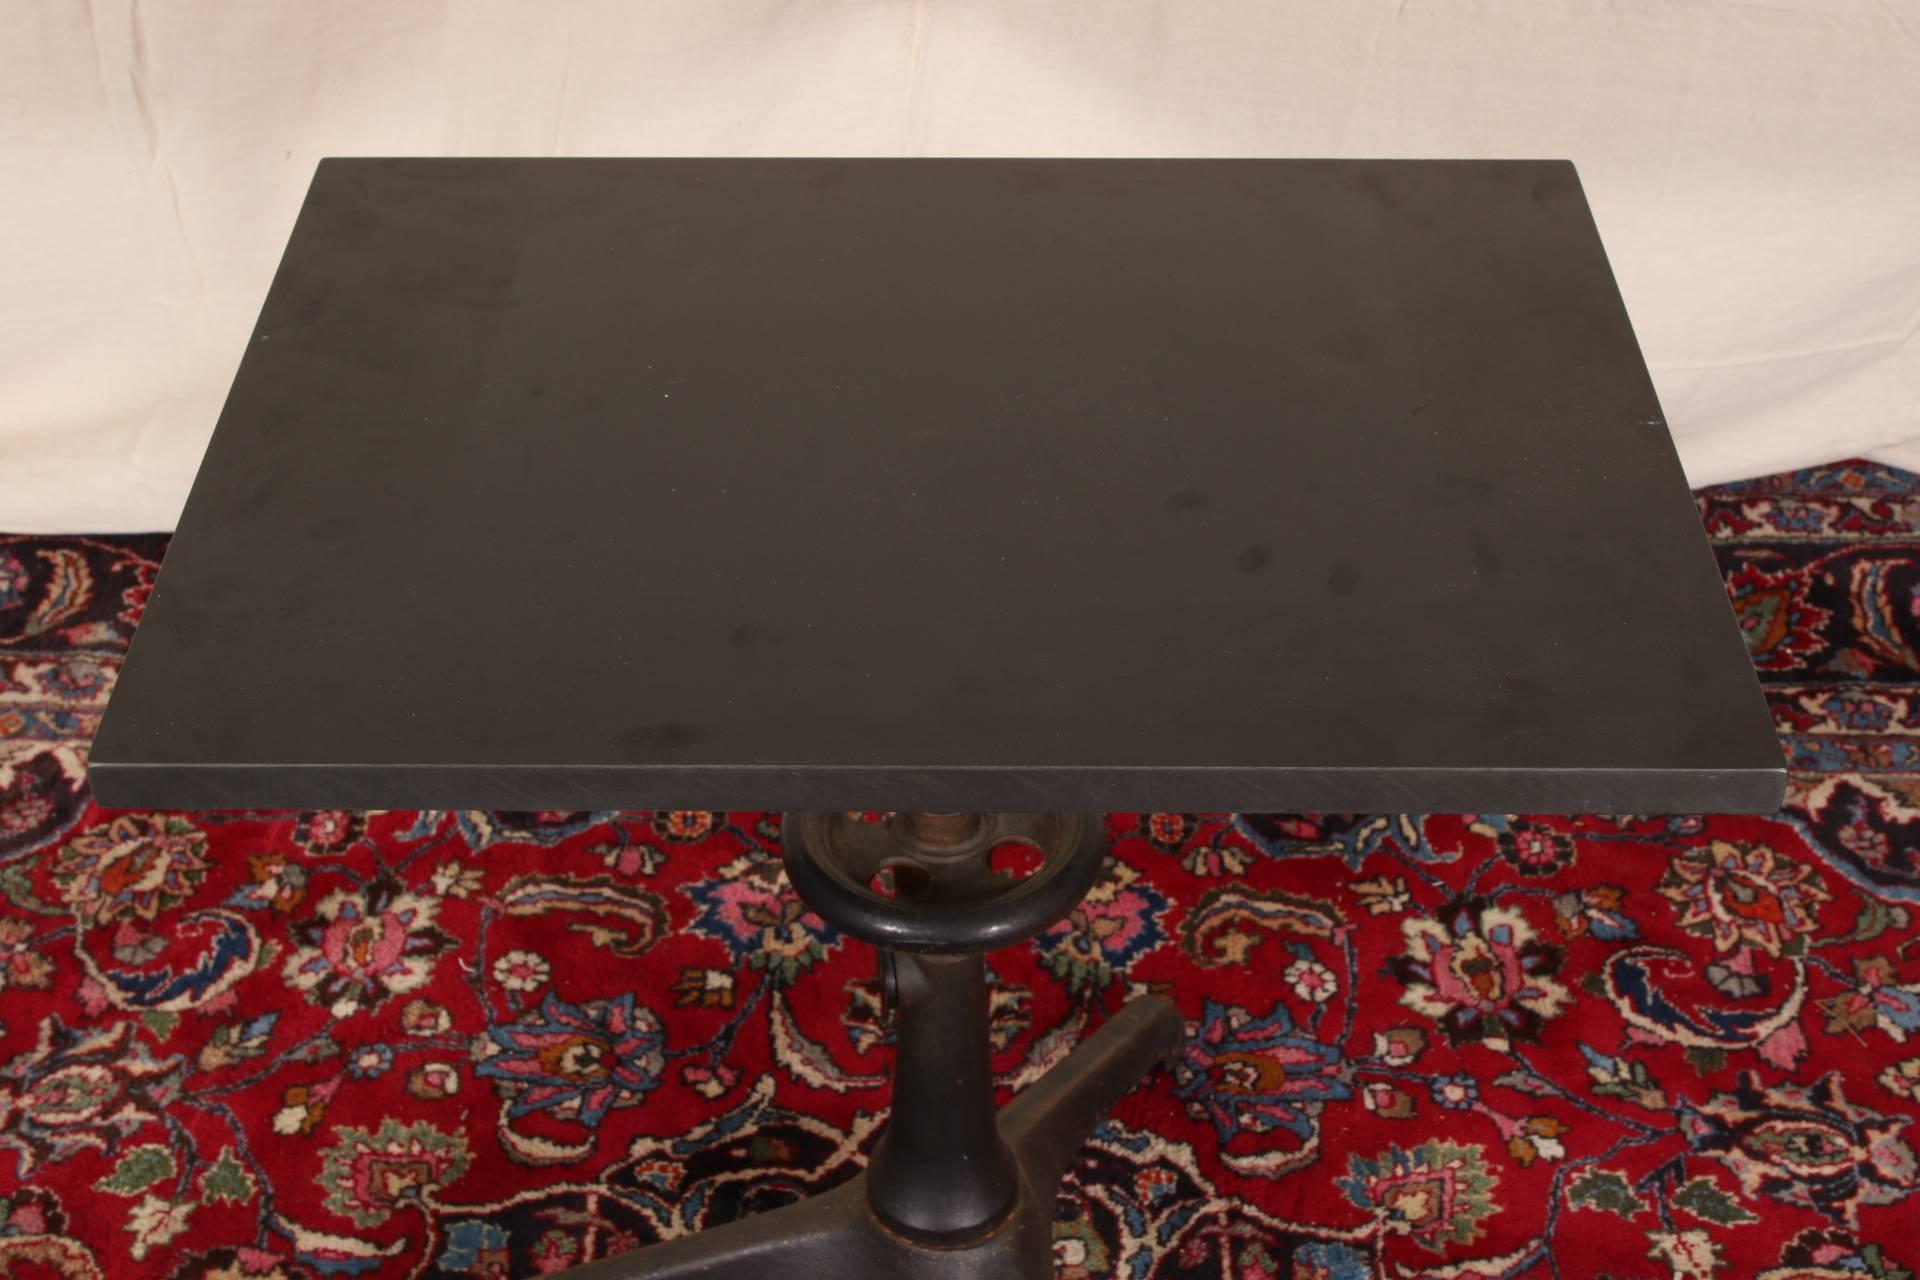 Industrial style table with Carl Zeiss base and formica top, black painted iron adjustable tripod base with a rectangular black formica top. 

Condition: Expected wear and signs of use including some areas of rust to base, light surface scratching